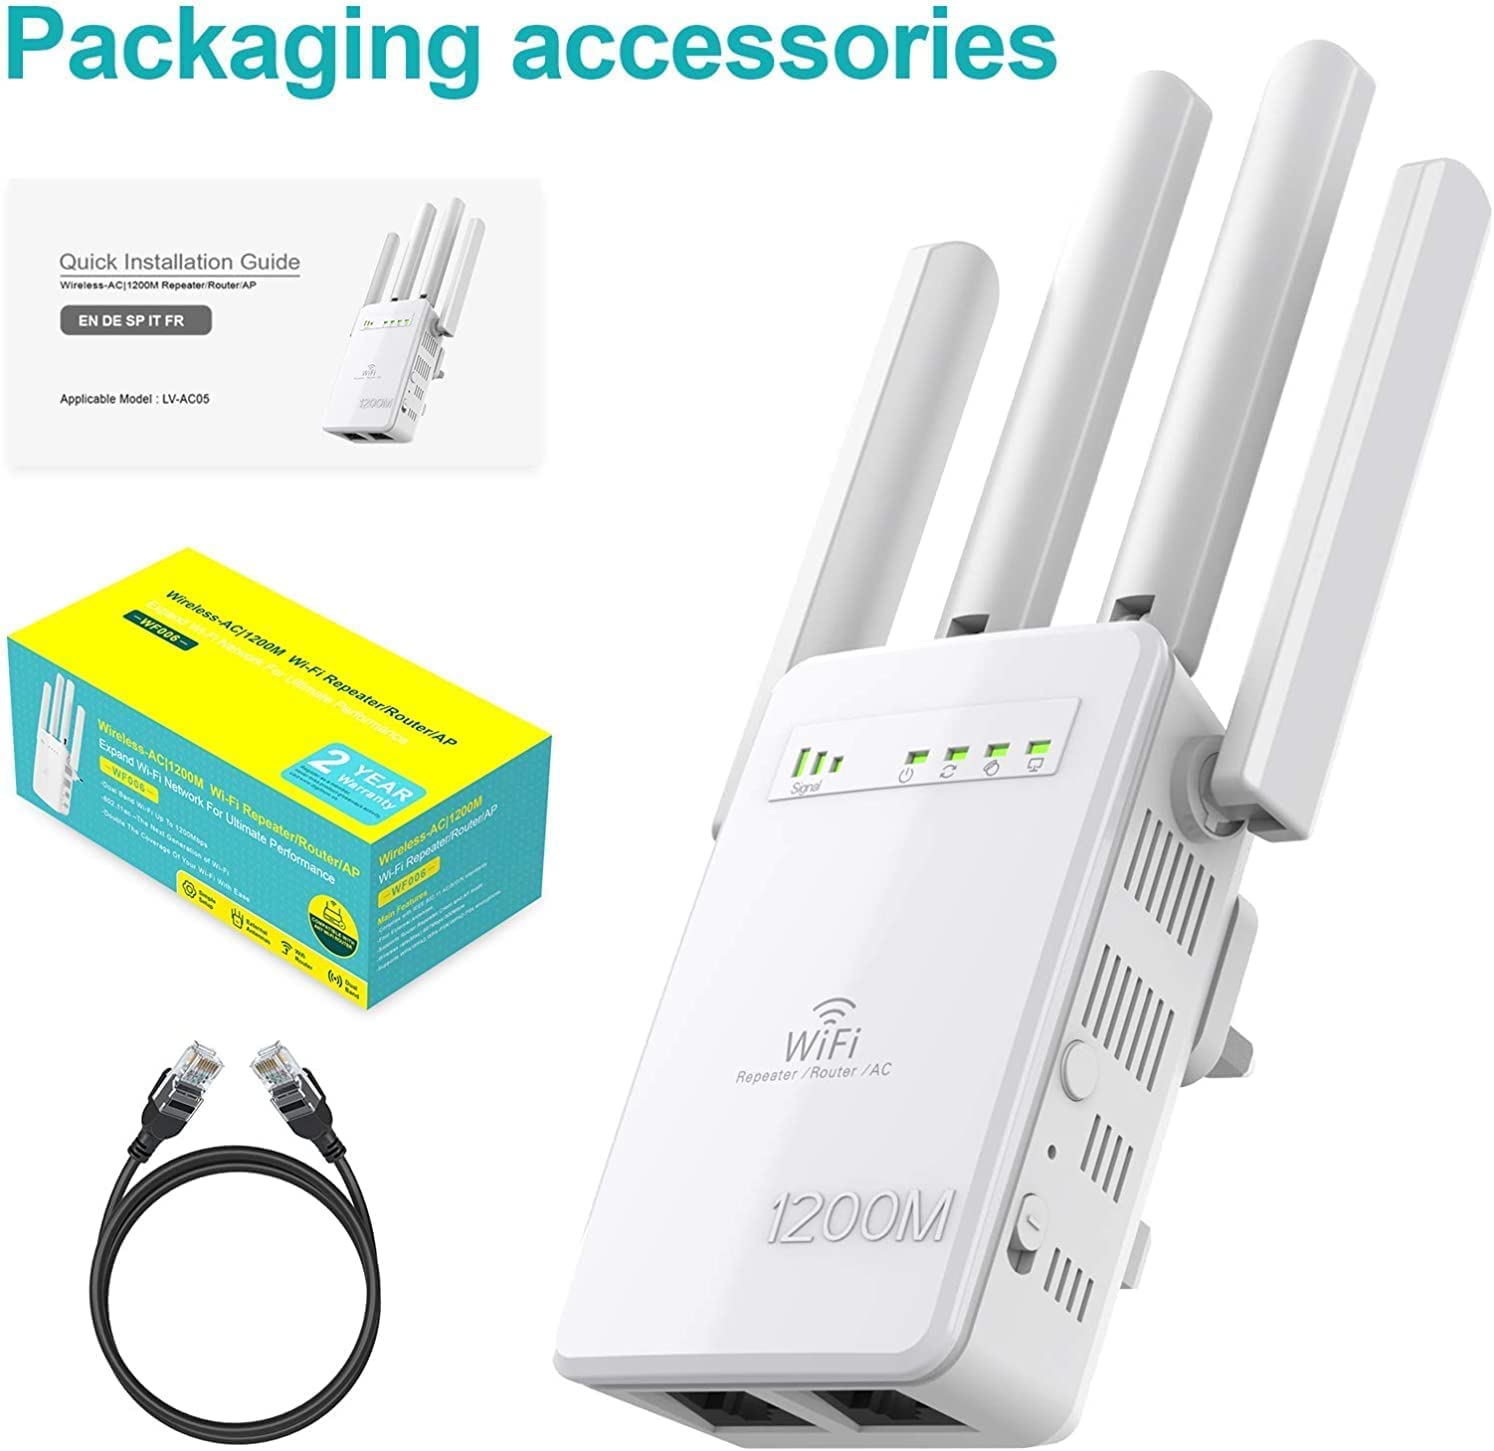 Ethernet Port 360 Full Coverage Dual Band WiFi Range Extender Signal Booster Access Point Mode WiFi Repeater 